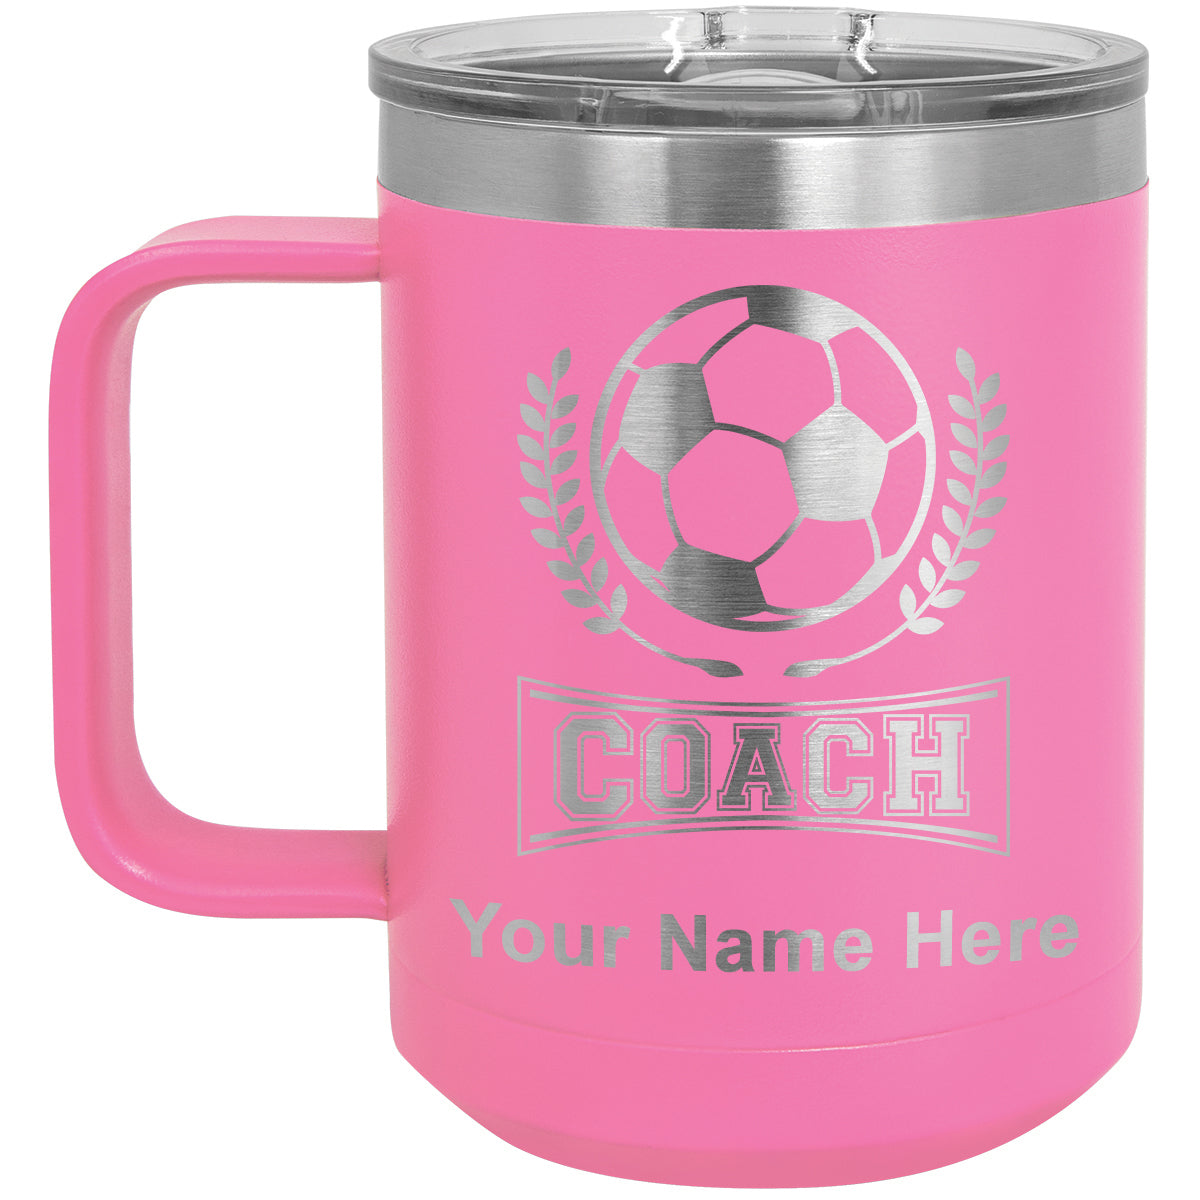 15oz Vacuum Insulated Coffee Mug, Soccer Coach, Personalized Engraving Included